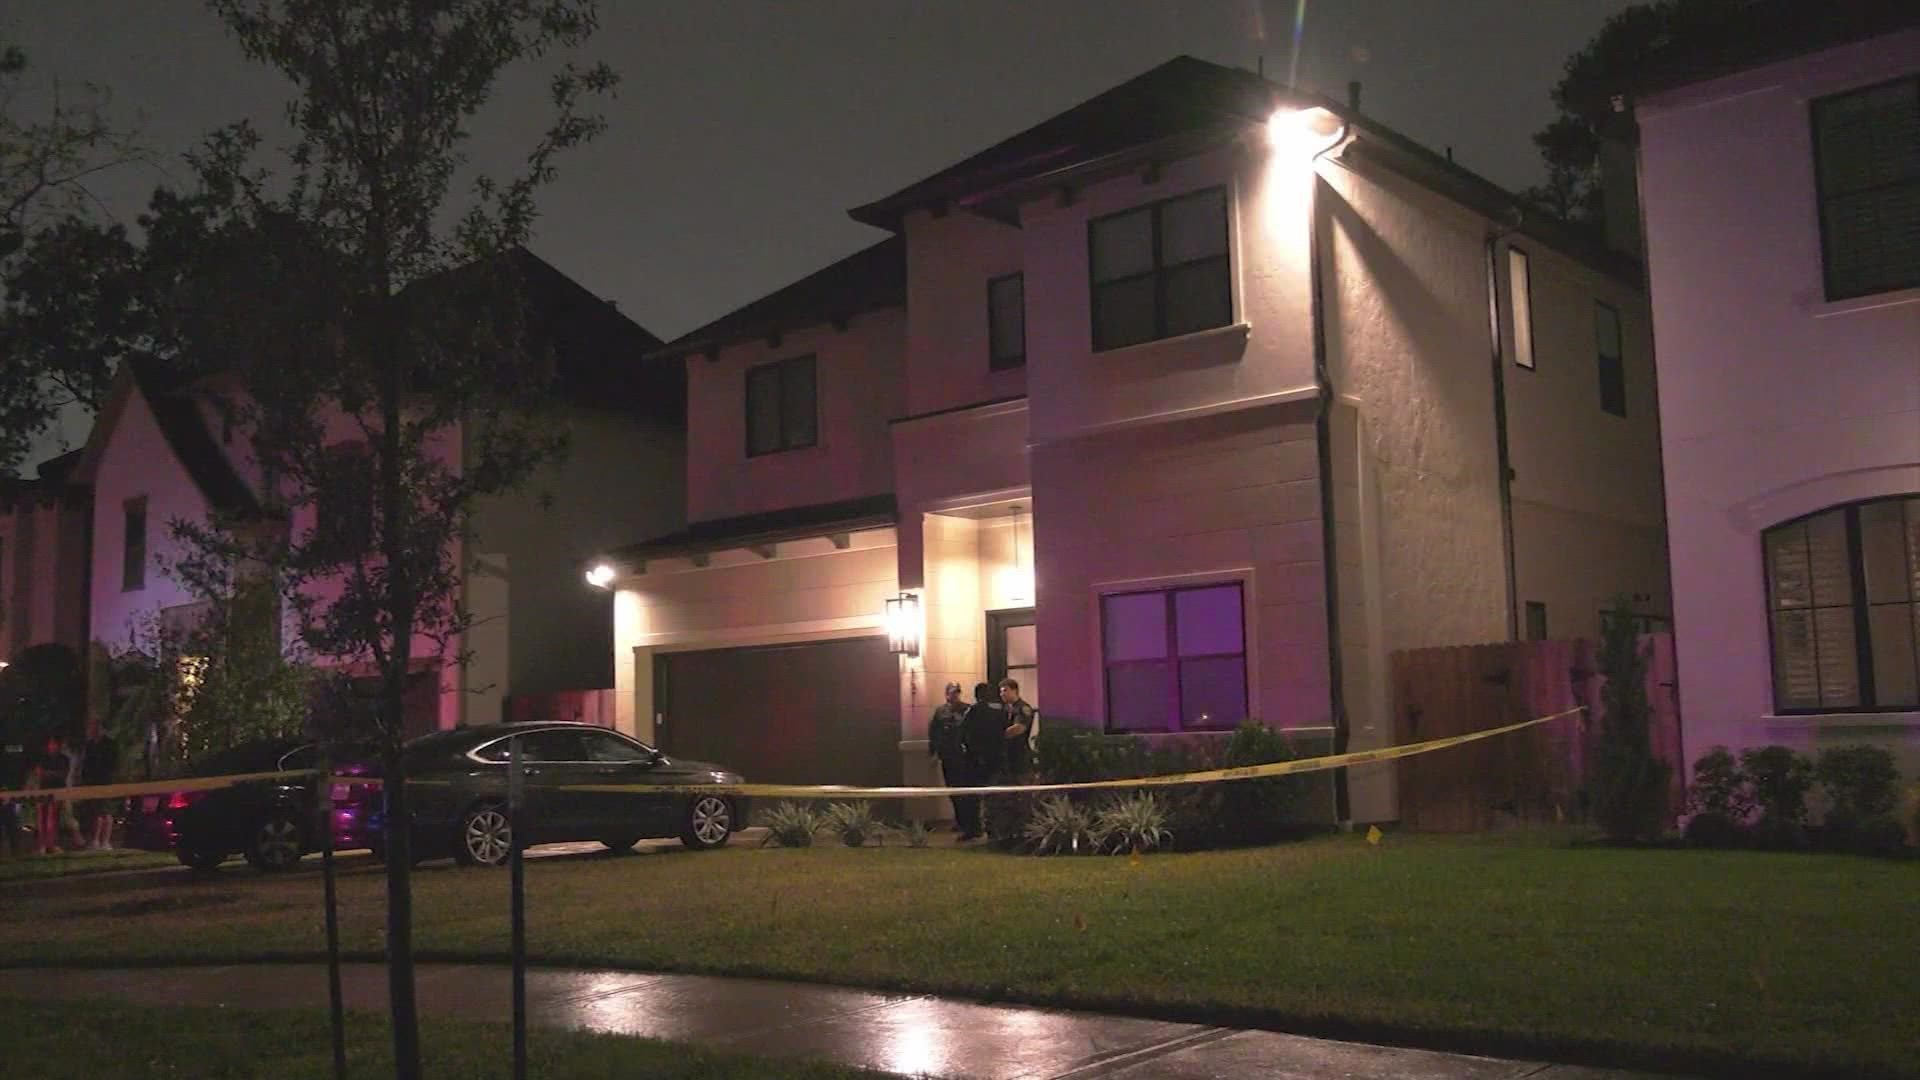 A man and woman were killed while another man and a teen were critically injured in the shooting.